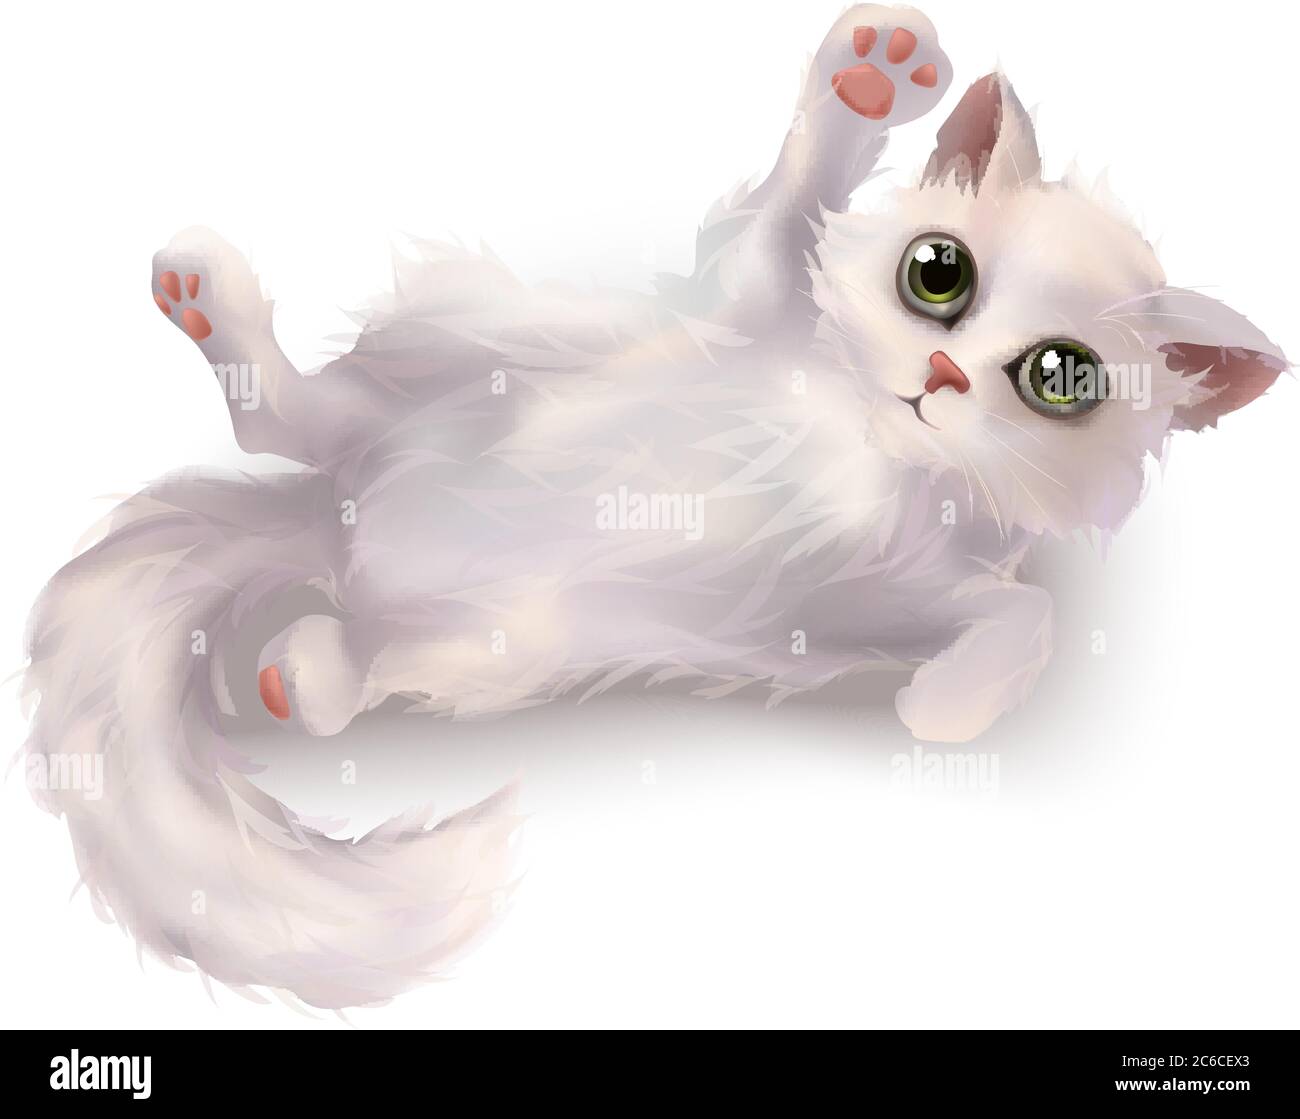 2,179 Puffy Cat Images, Stock Photos, 3D objects, & Vectors